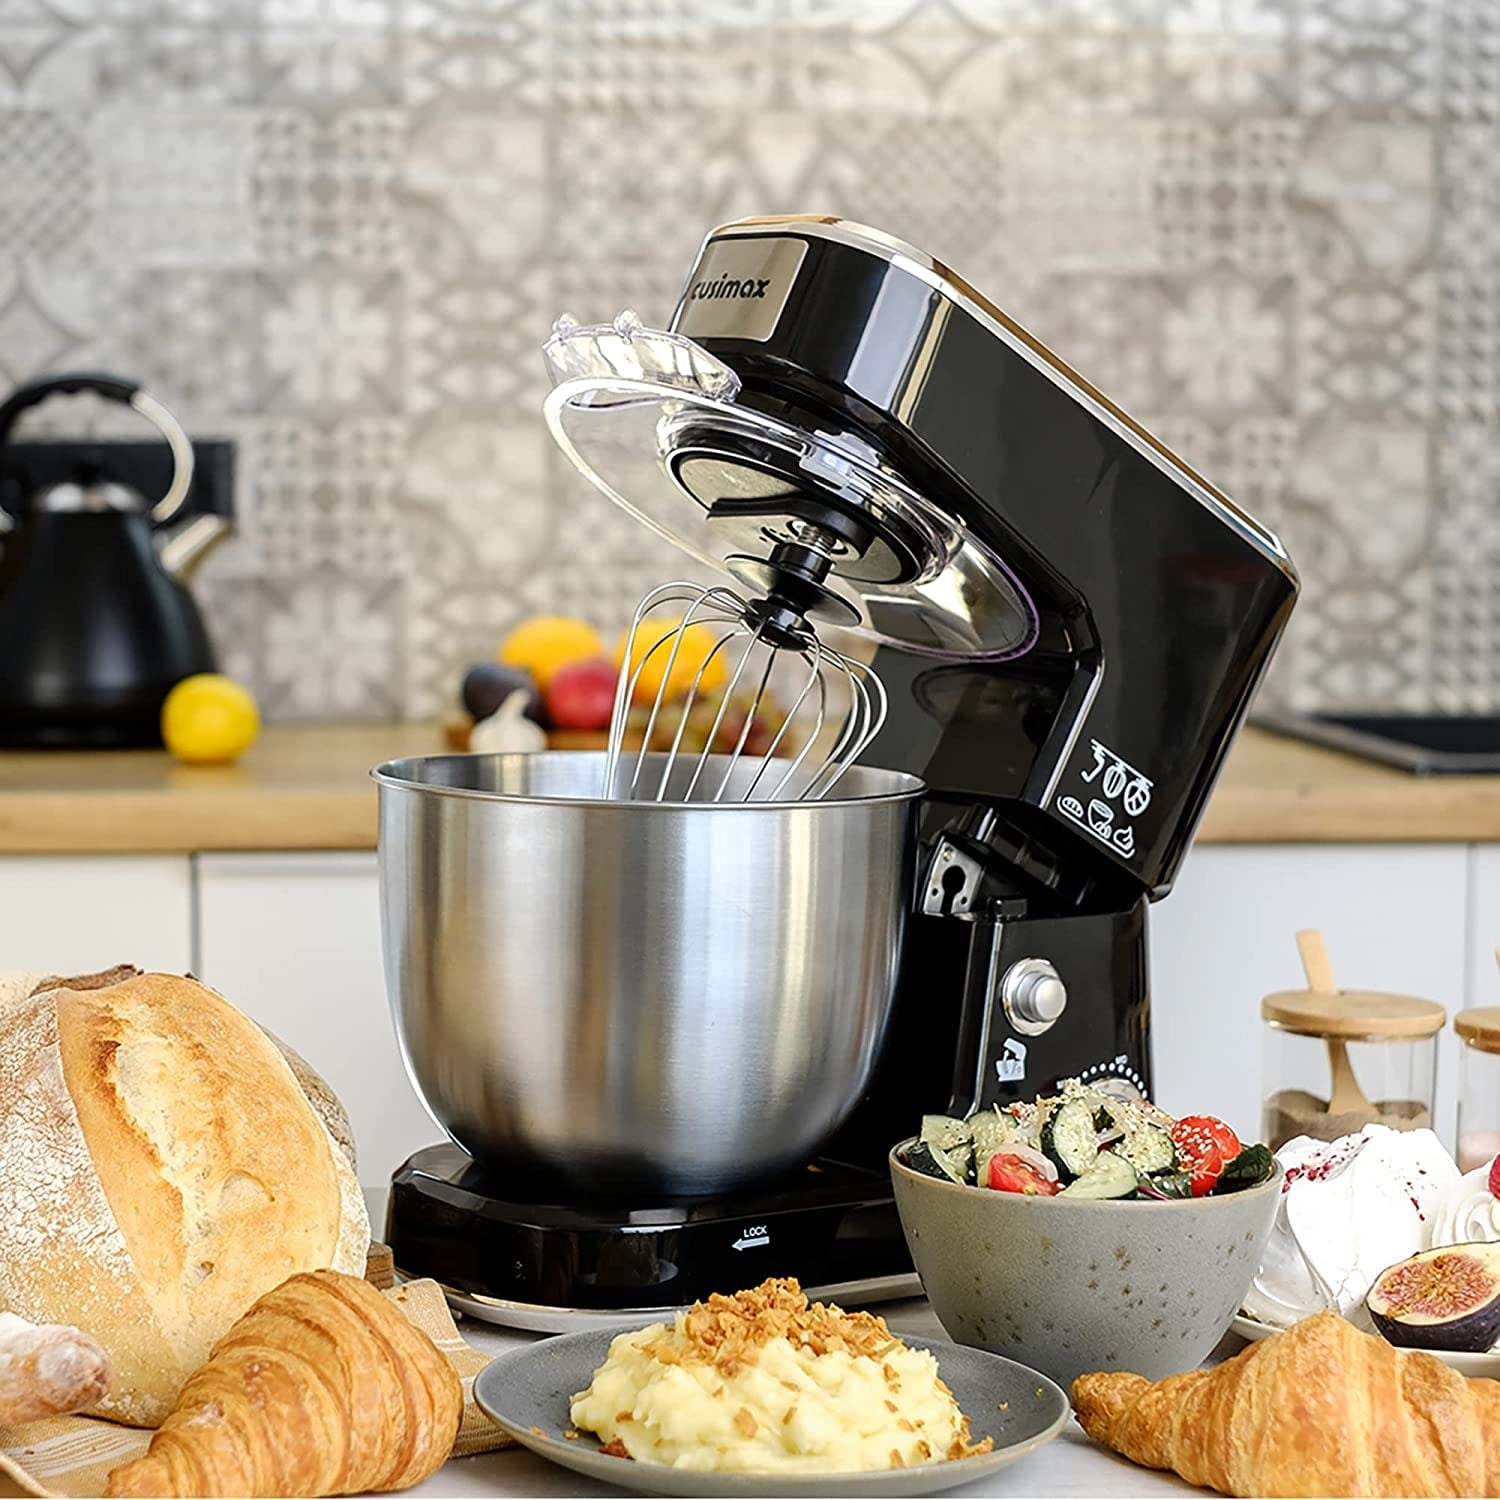 https://ak1.ostkcdn.com/images/products/is/images/direct/65f7d5c6c6ce685d65744881d574e3b0ed869667/Stand-Mixer%2C-Dough-Mixer-Tilt-Head-Electric-Mixer-with-5-Quart-Stainless-Steel-Bowl.jpg